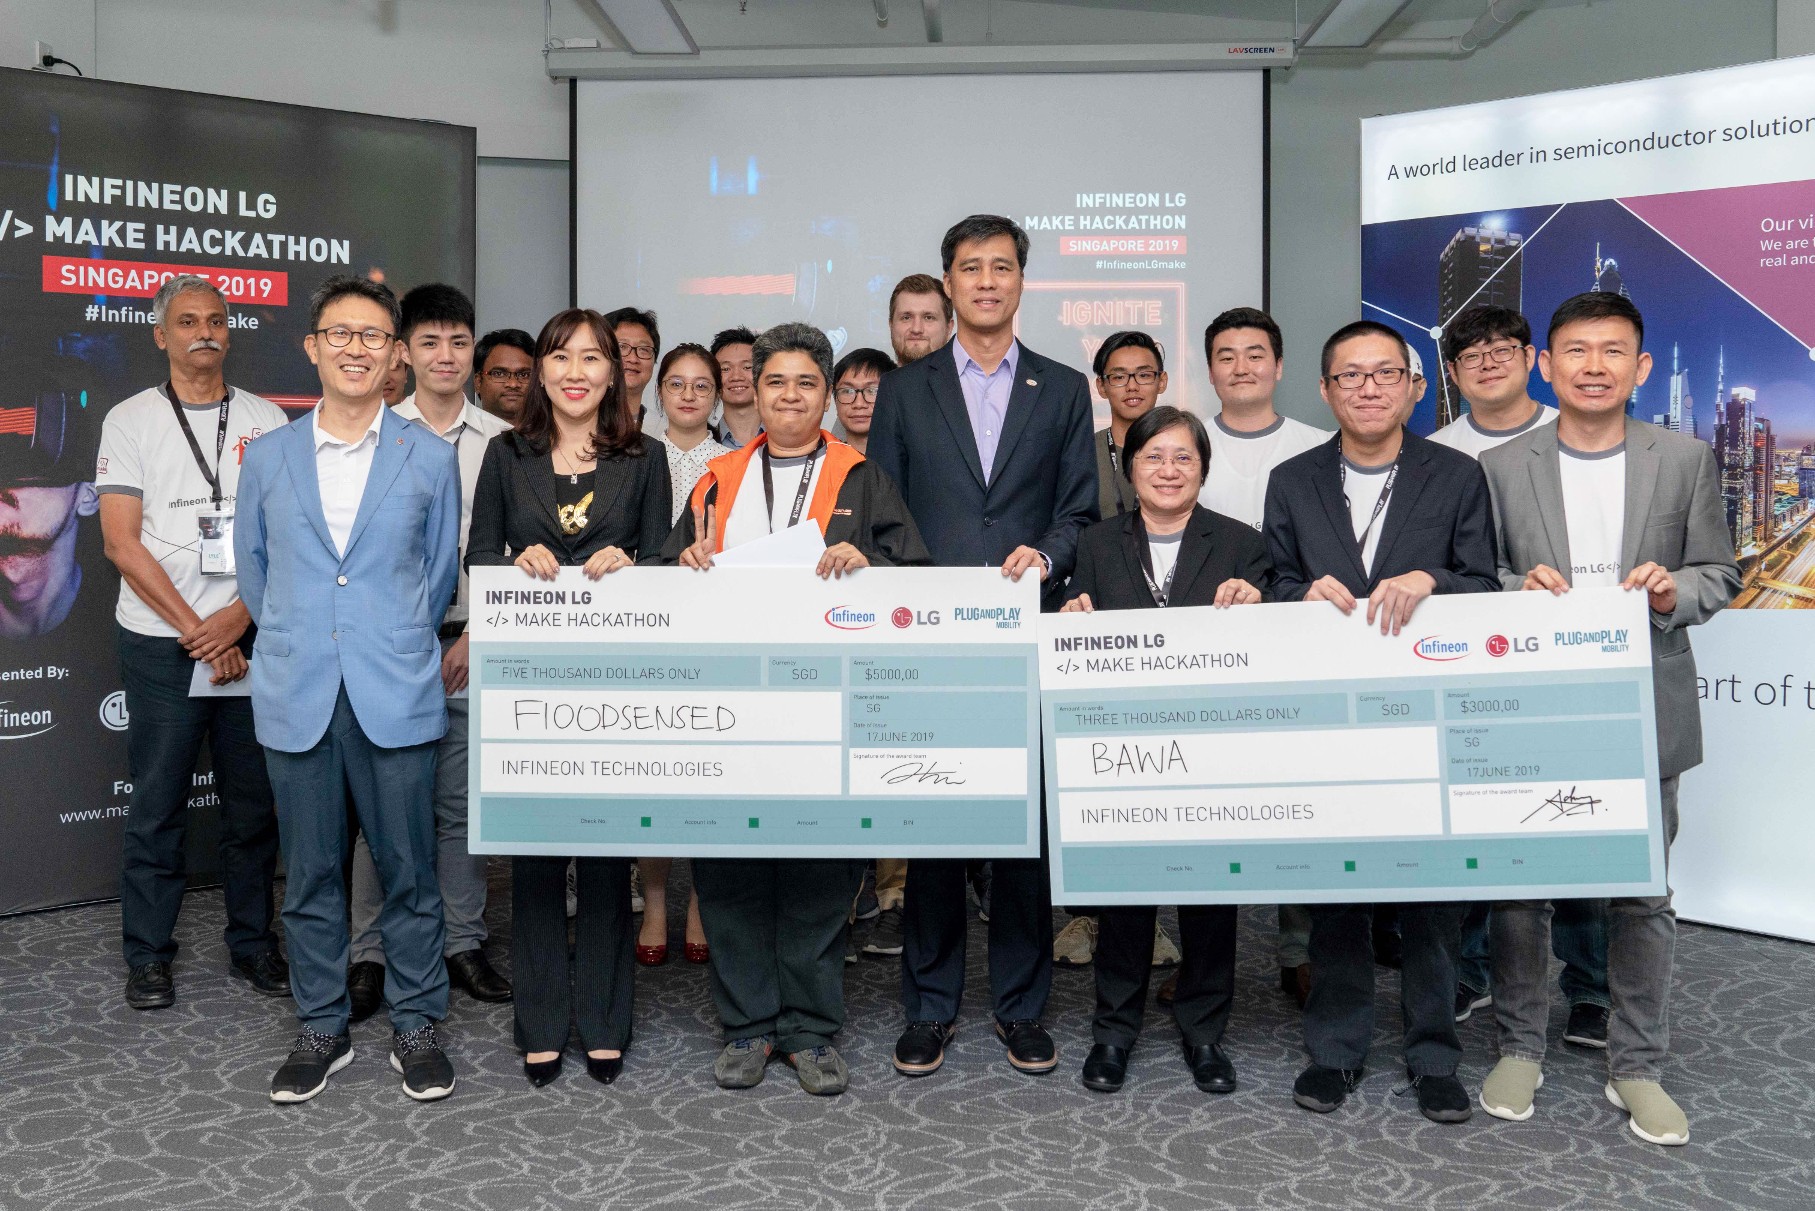 Delegates from Infineon Technologies and LG Electronics at the inaugural event “Infineon LG Make Hackathon” in Singapore.